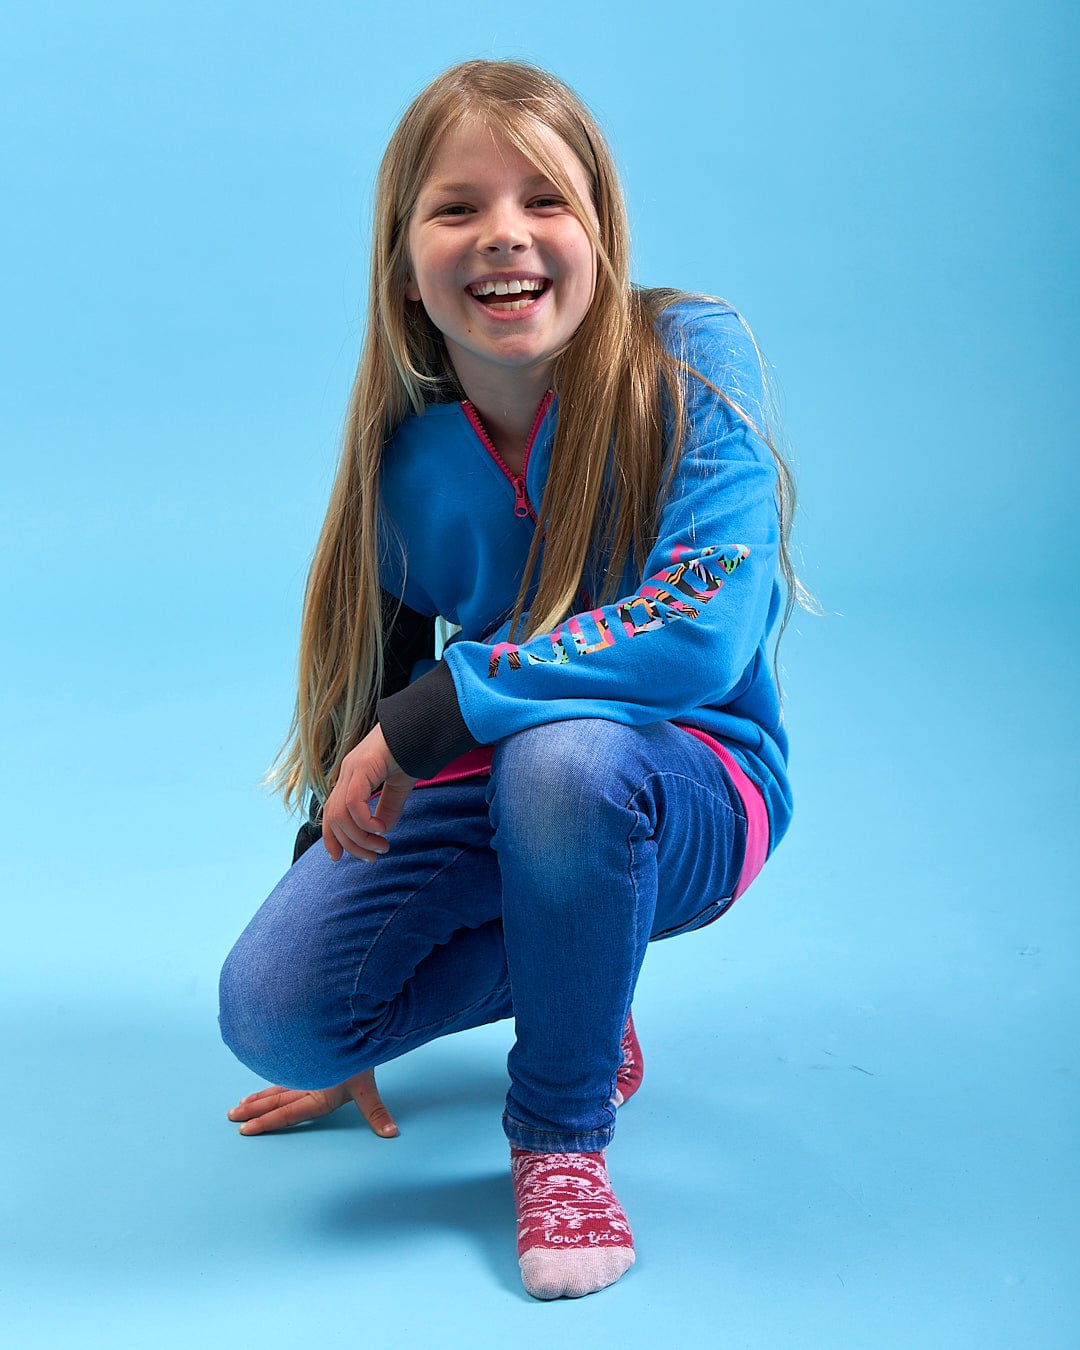 A girl wearing a Cara - Girls Zip Hoodie - Blue from Saltrock, squatting on a blue background.